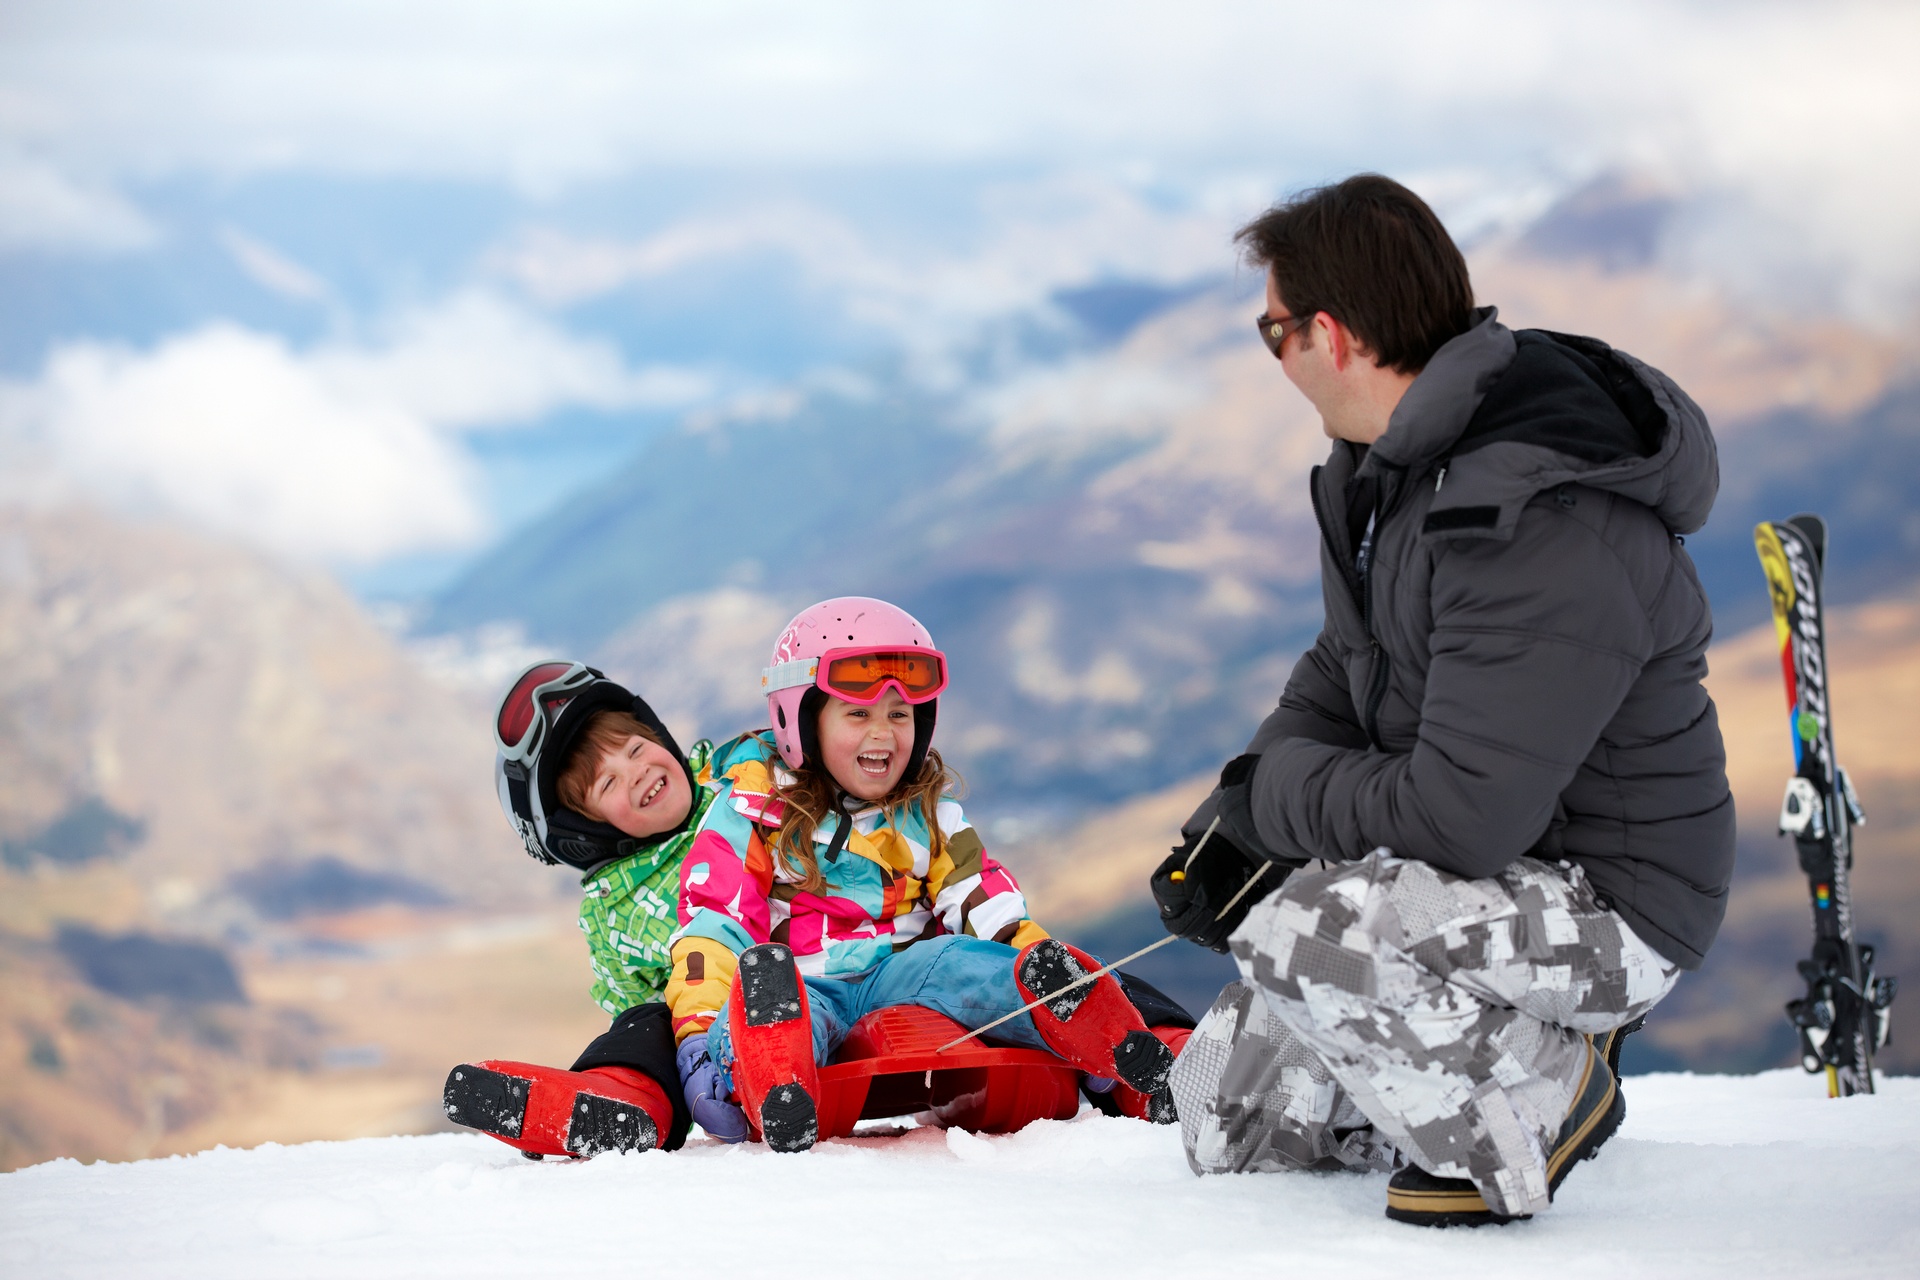 Father and two children on ski mountain playing